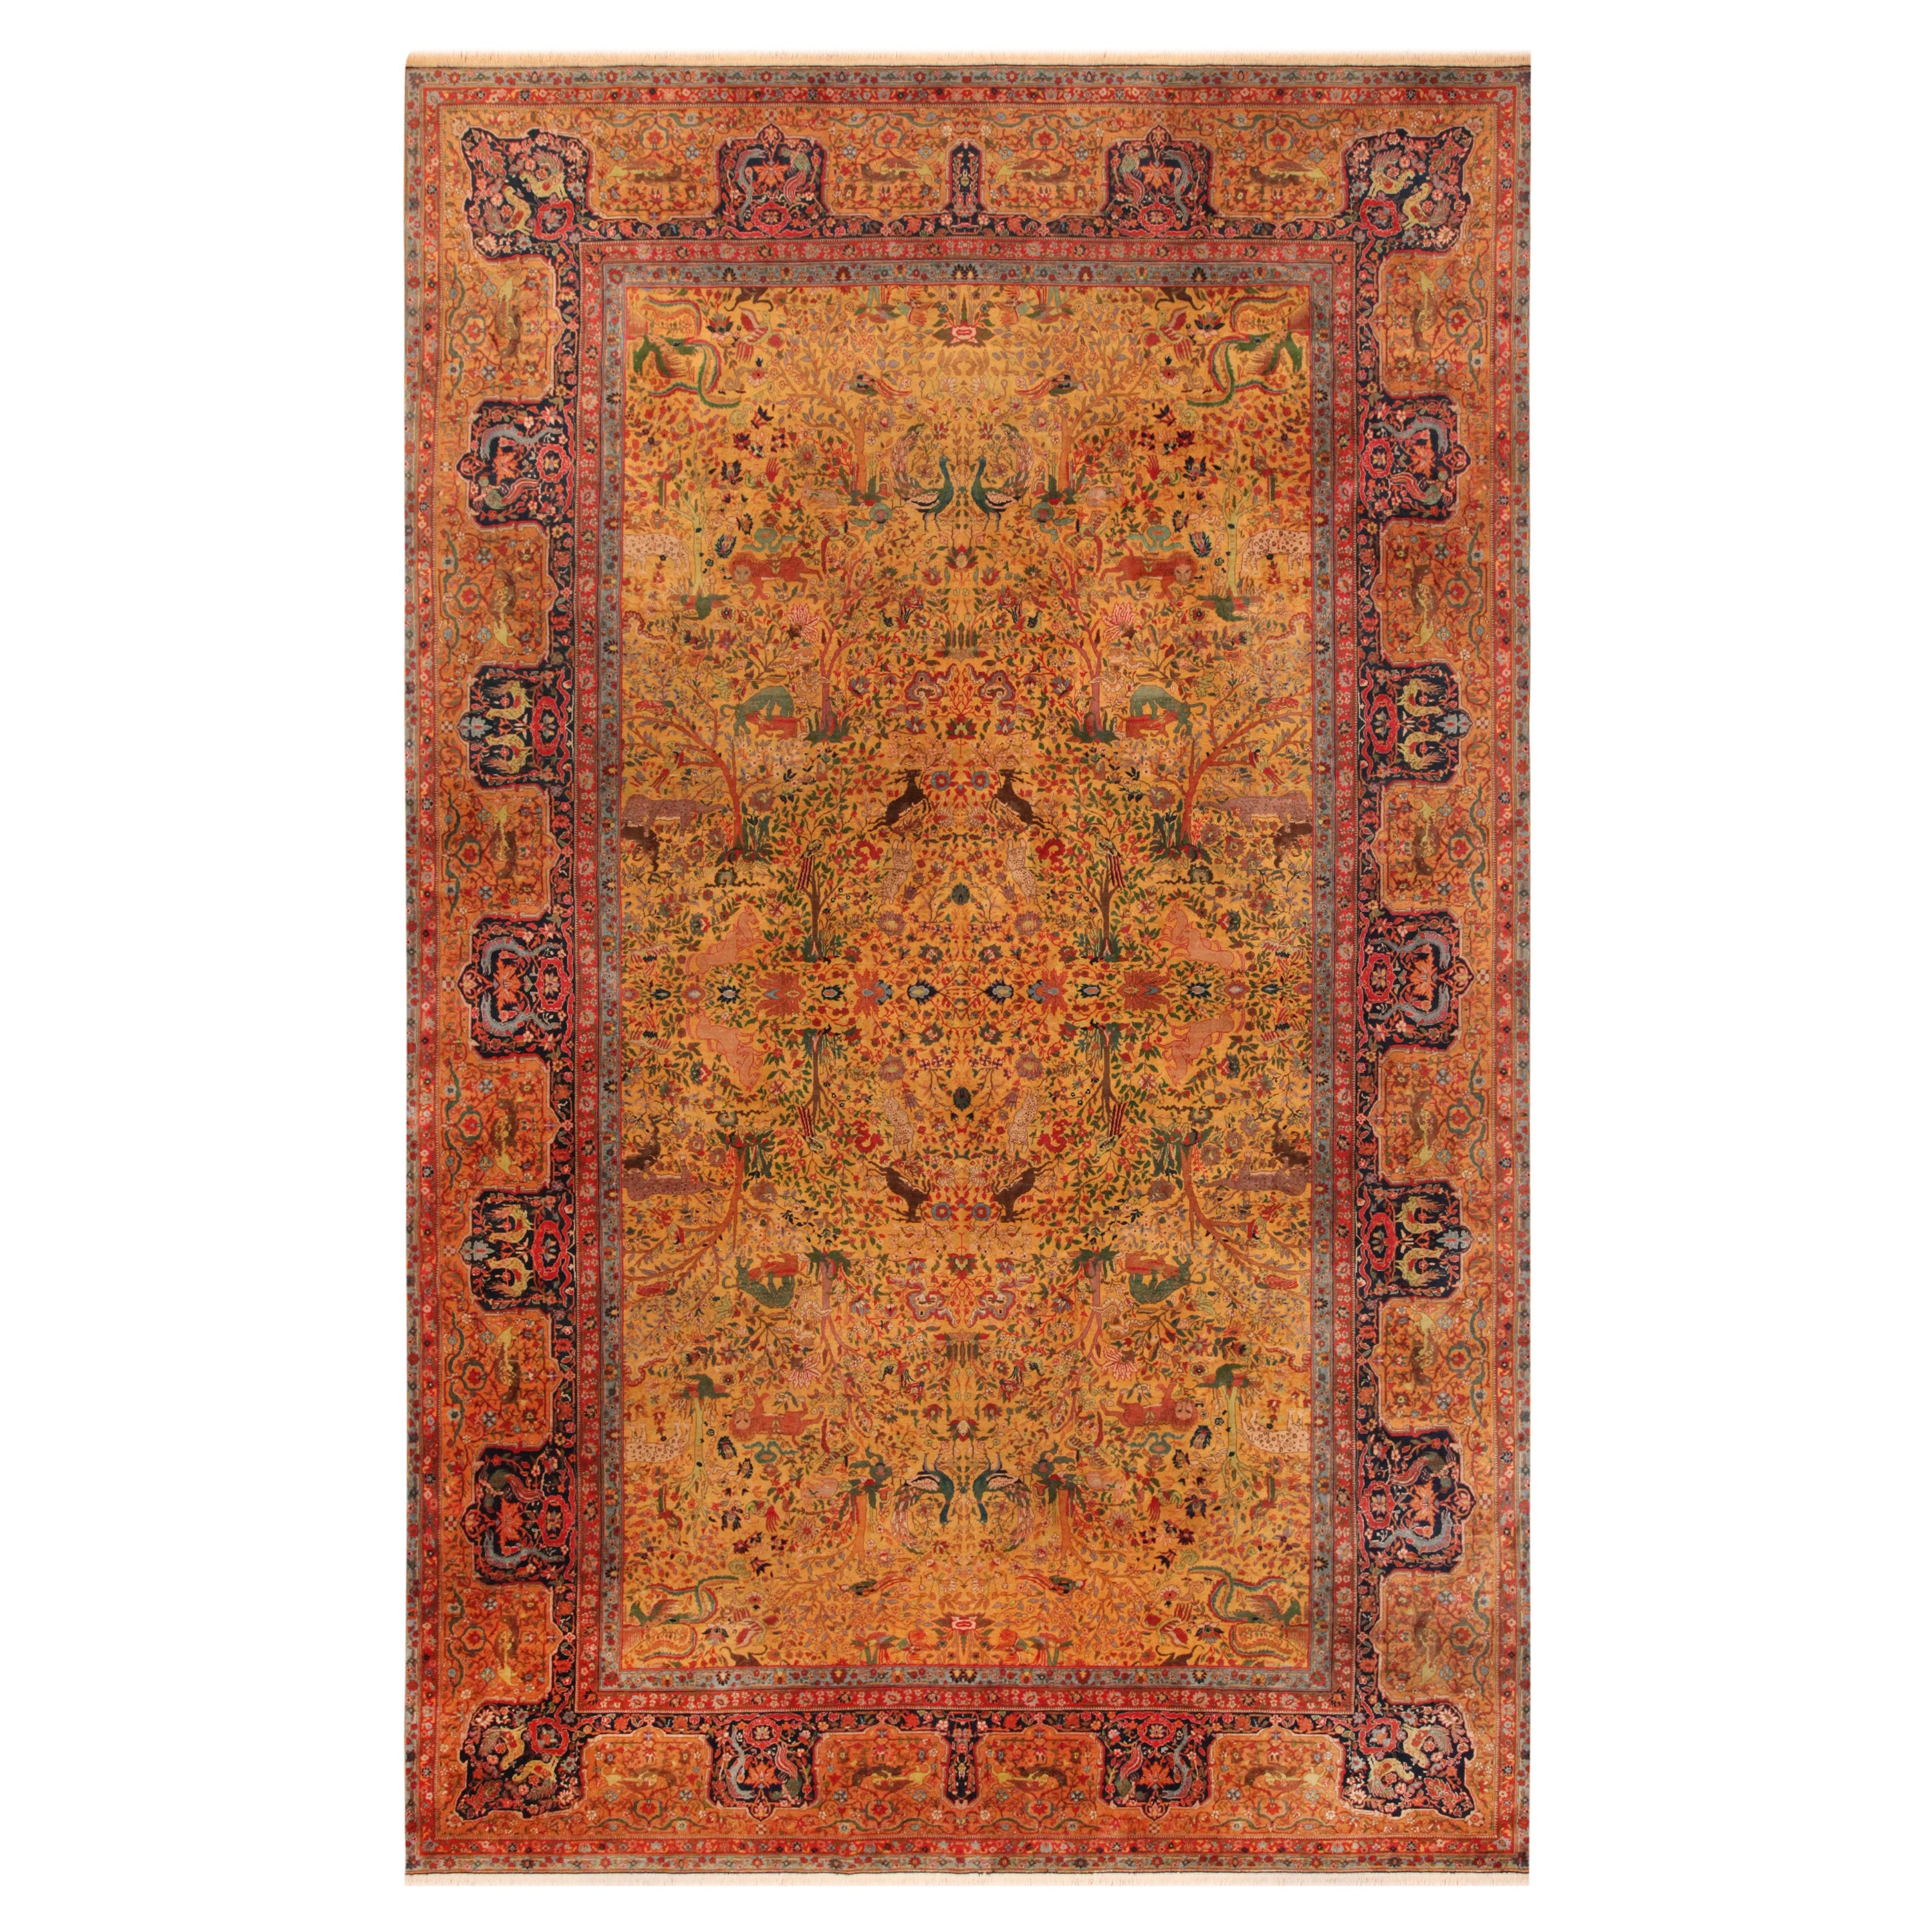 Nazmiyal Collection Antique Indian Agra Rug. Size: 11 ft x 17 ft 8 in